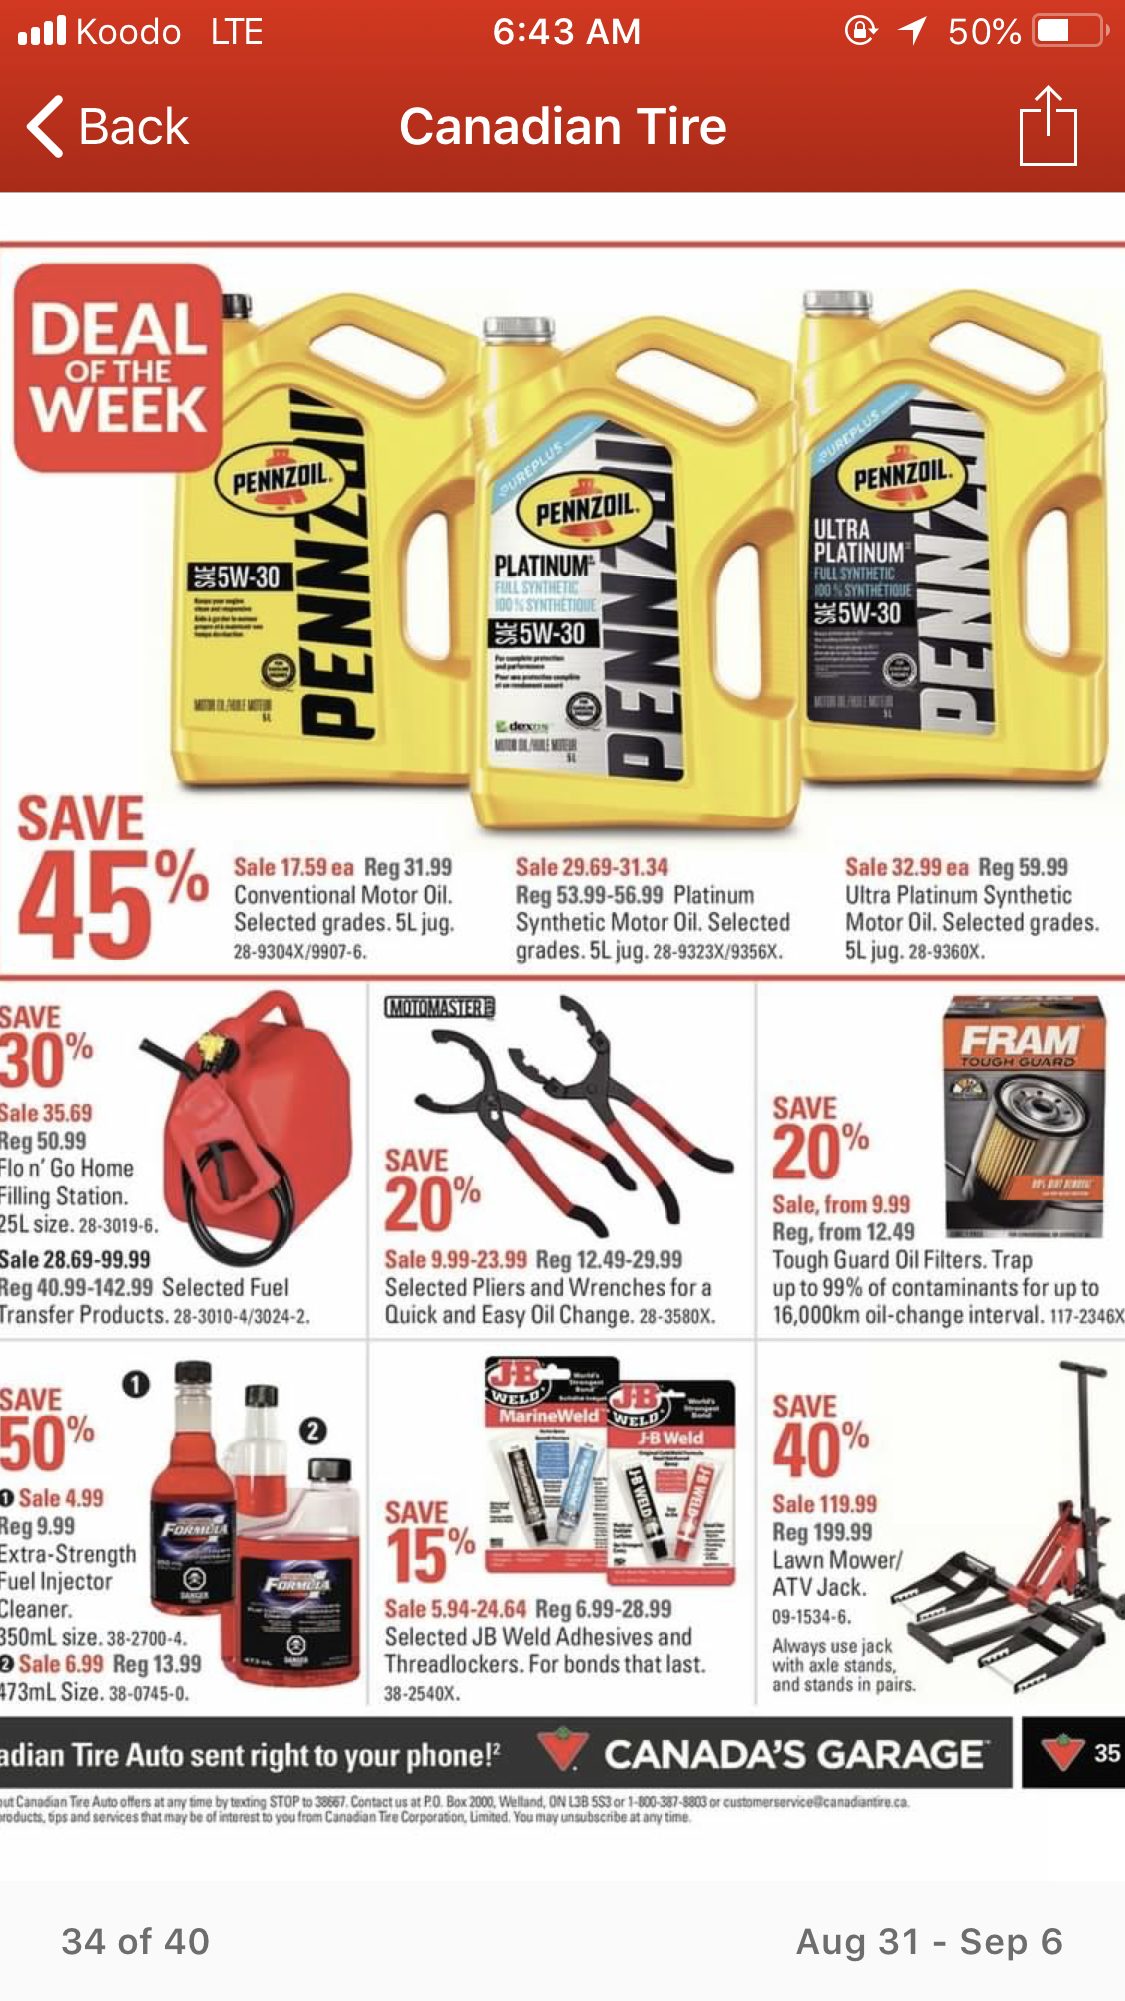 canadian-tire-45-off-pennzoil-euro-and-ultra-platinum-full-synthetic